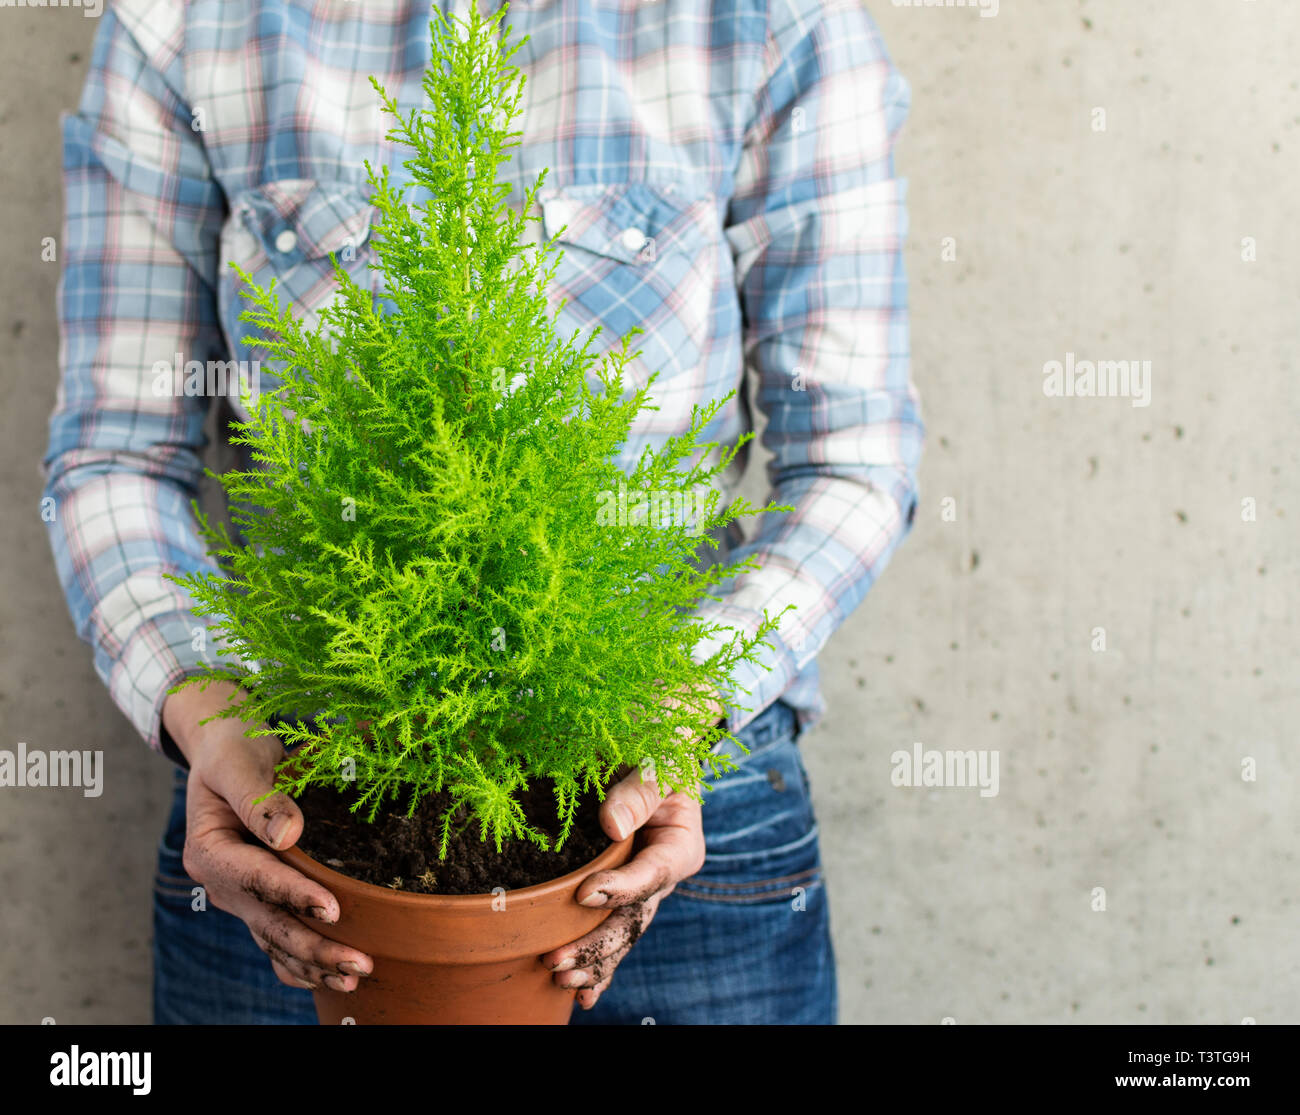 Transplanting a houseplant Cupressus Goldcrest Wilma in a clay pot, woman holding a pot in her hands against the background of a concrete wall Stock Photo